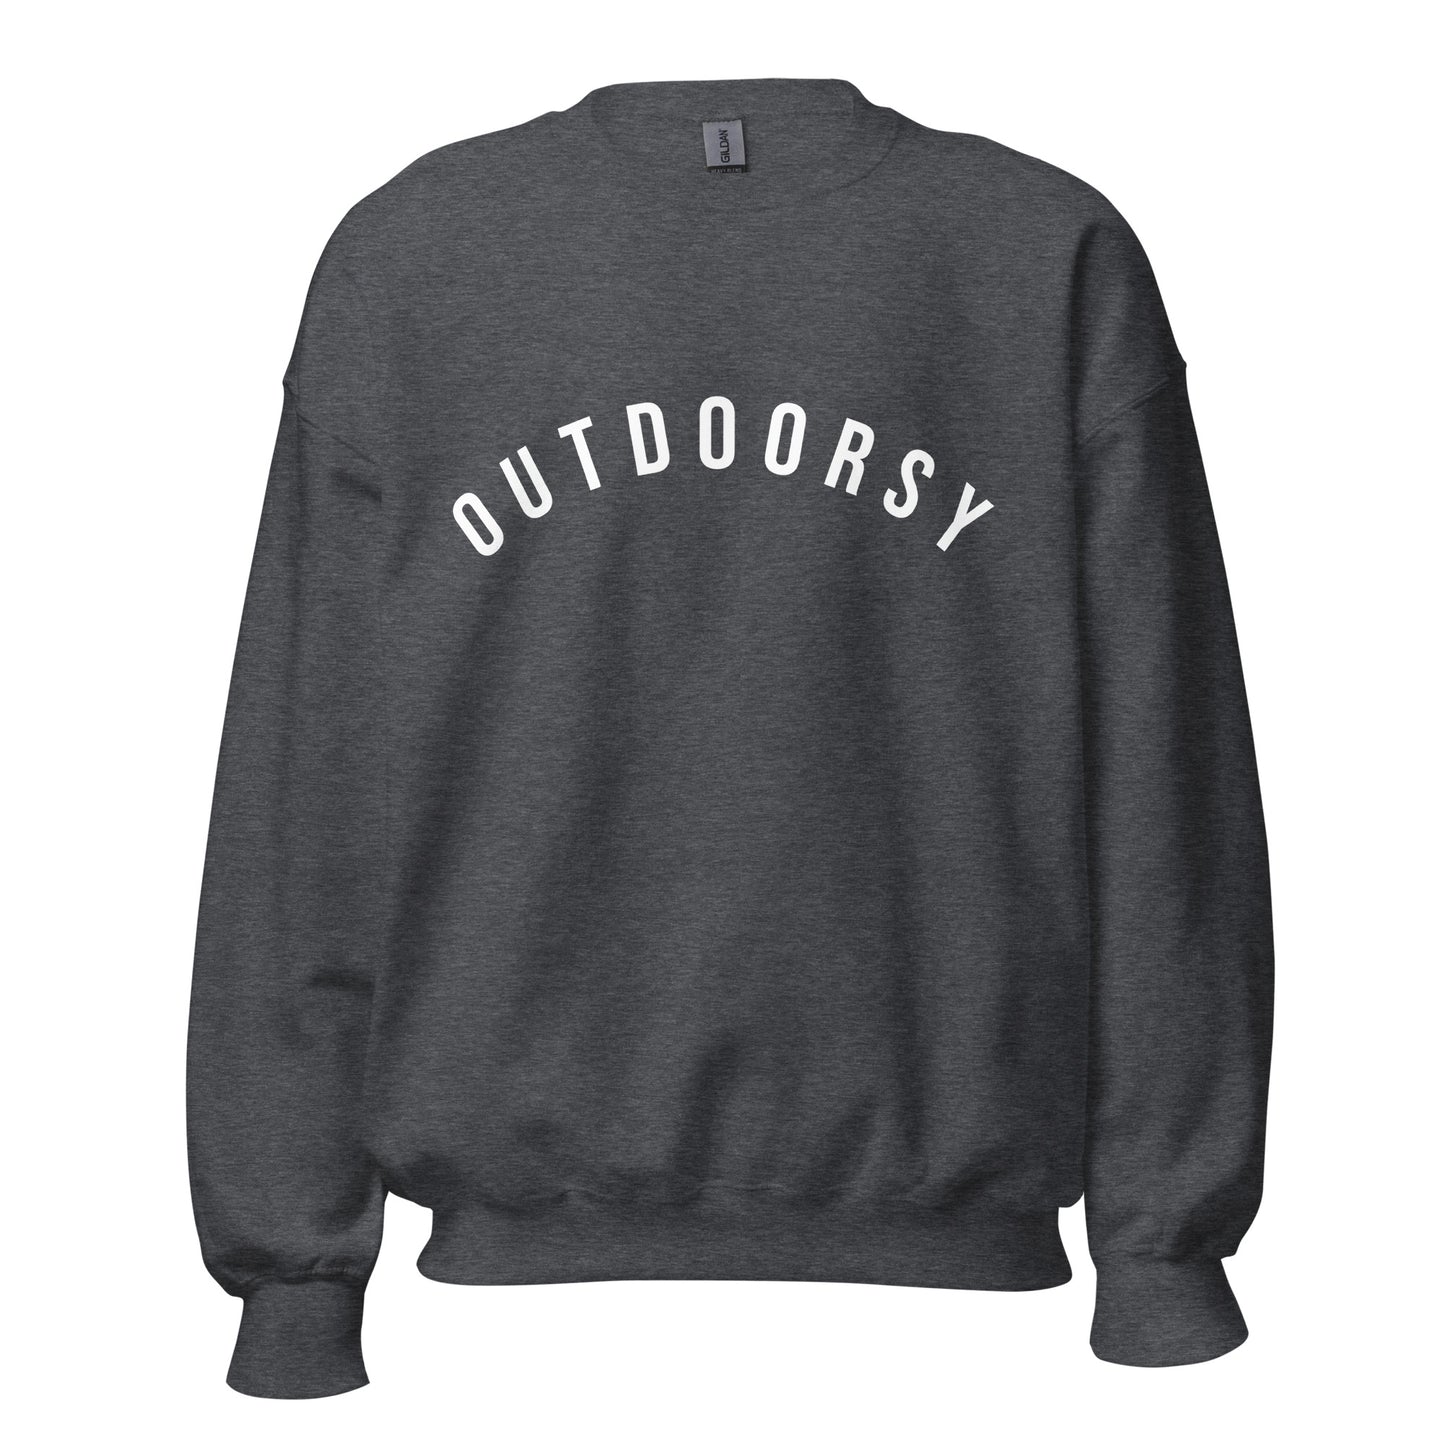 dark grey sweatshirt with the word outdoorsy in a white, capitalised font across the chest